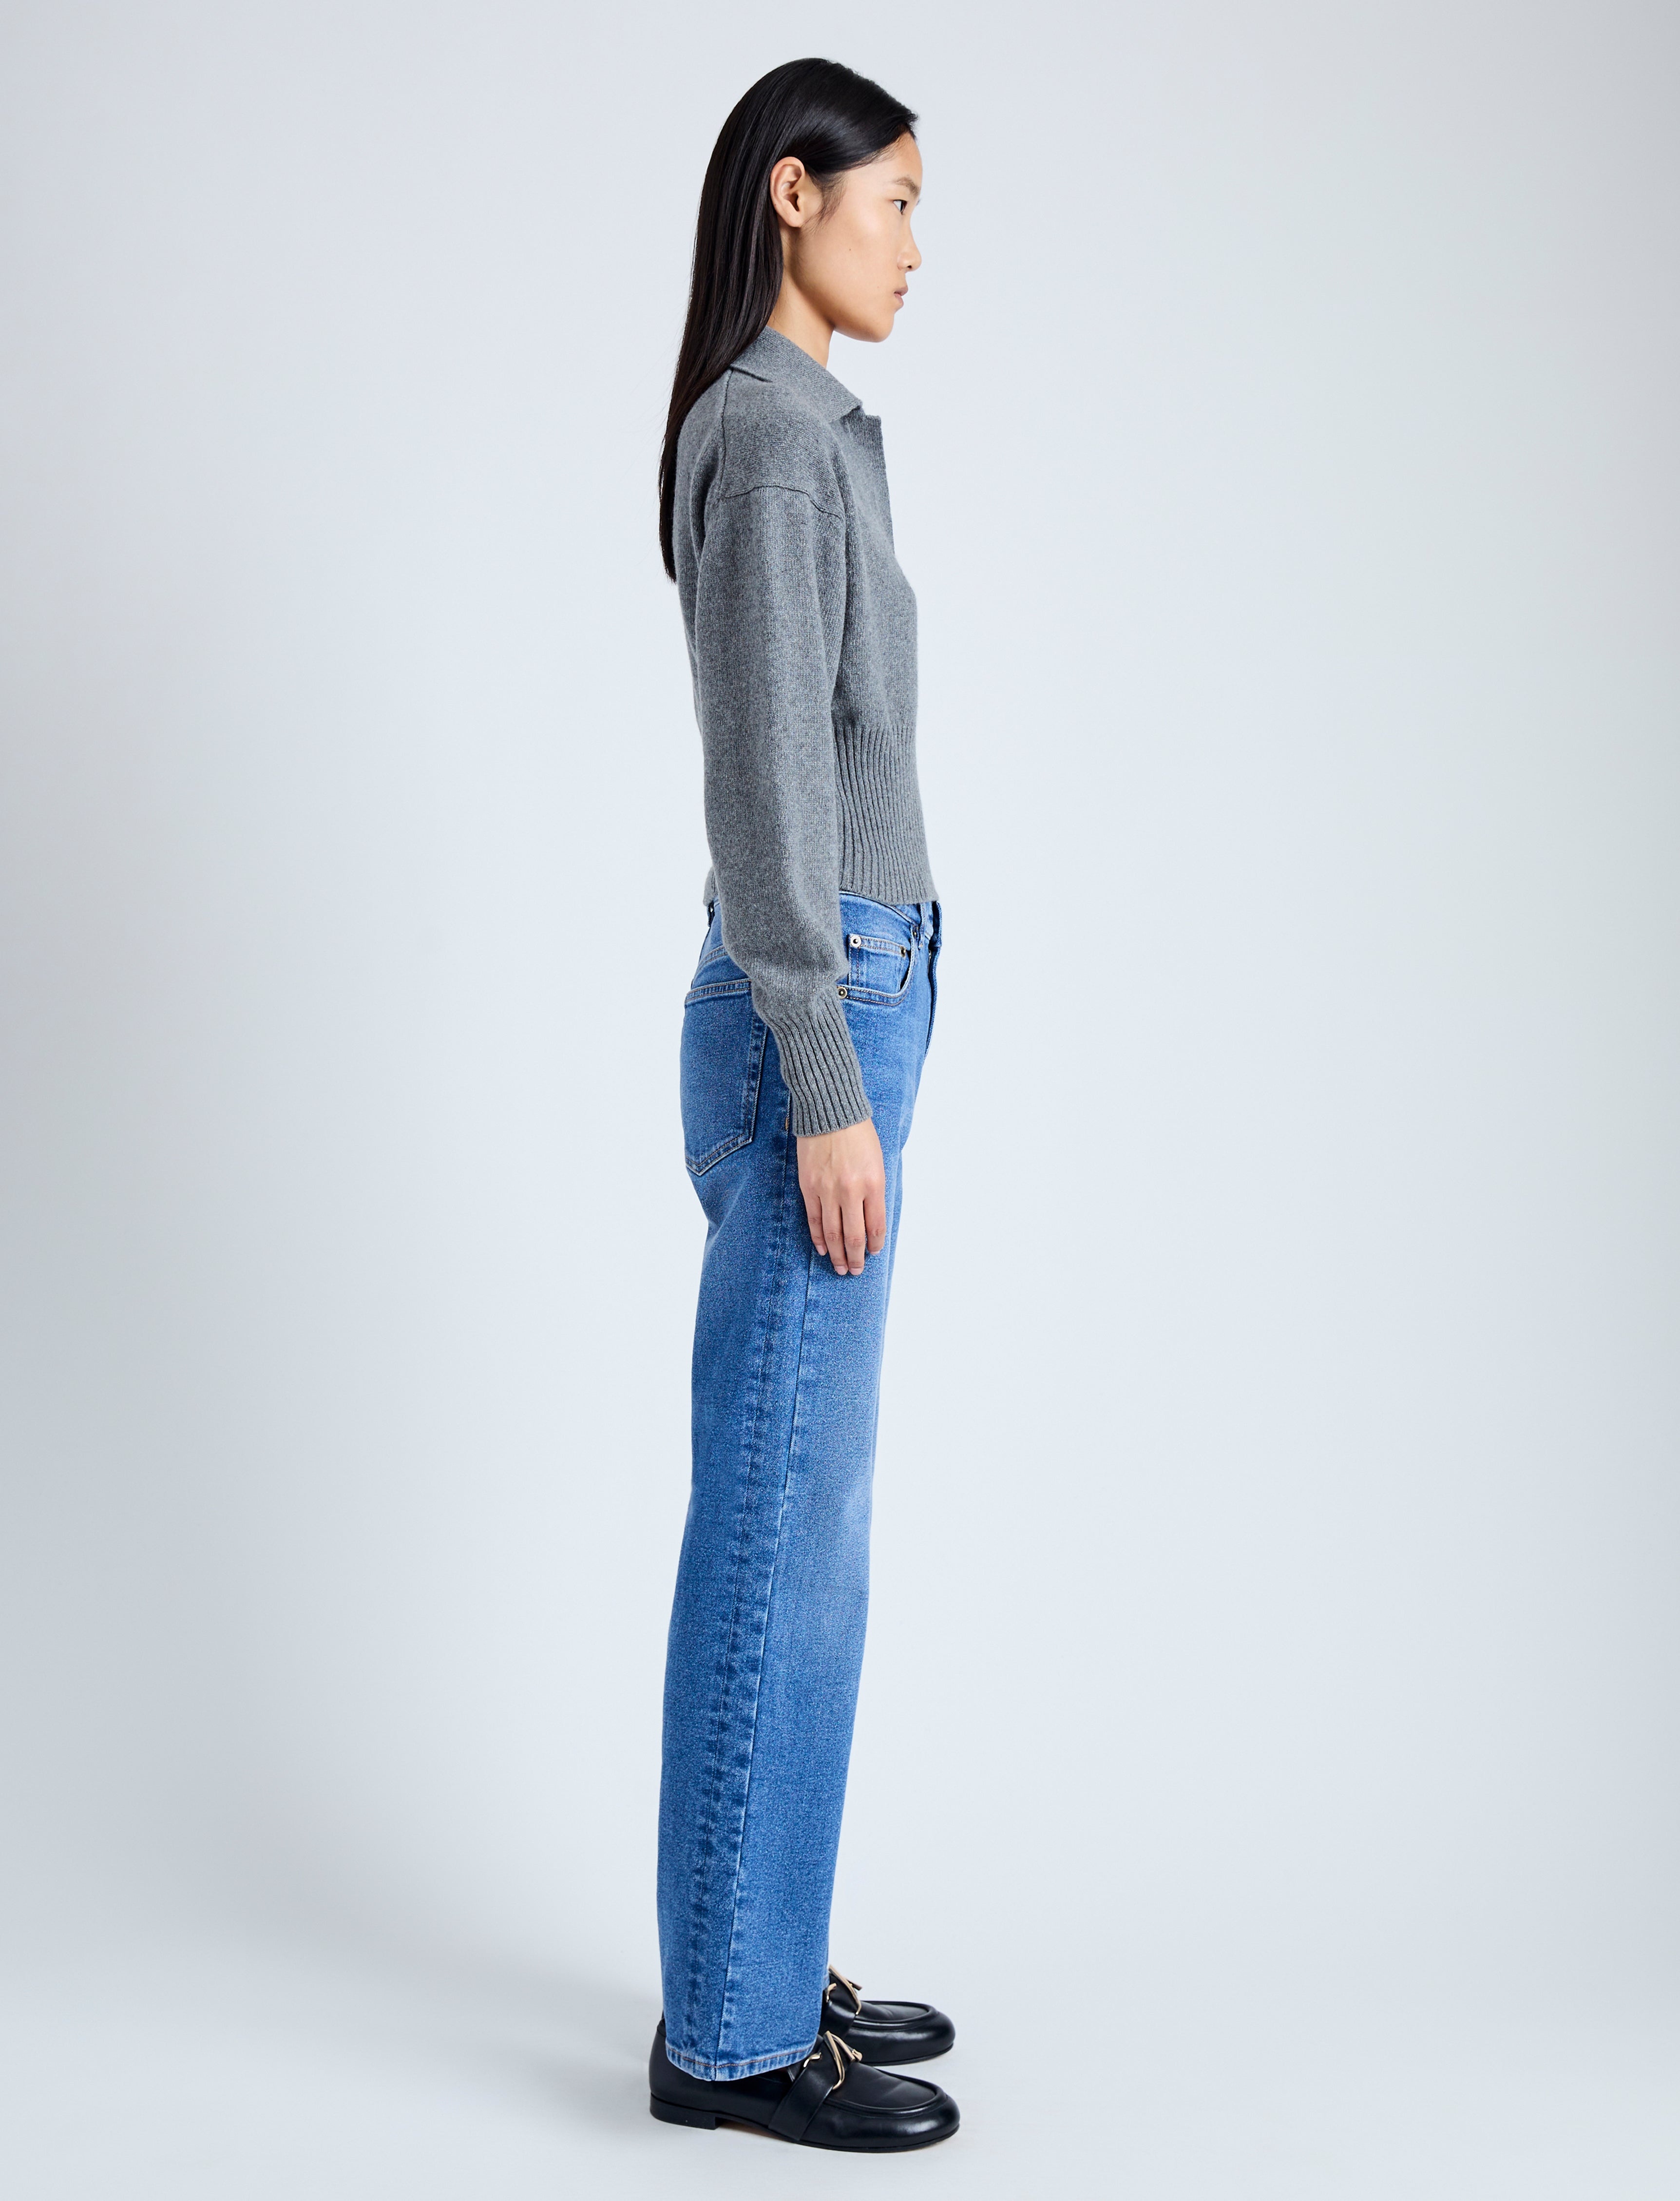 Jeanne Polo Sweater in Eco Cashmere - 4